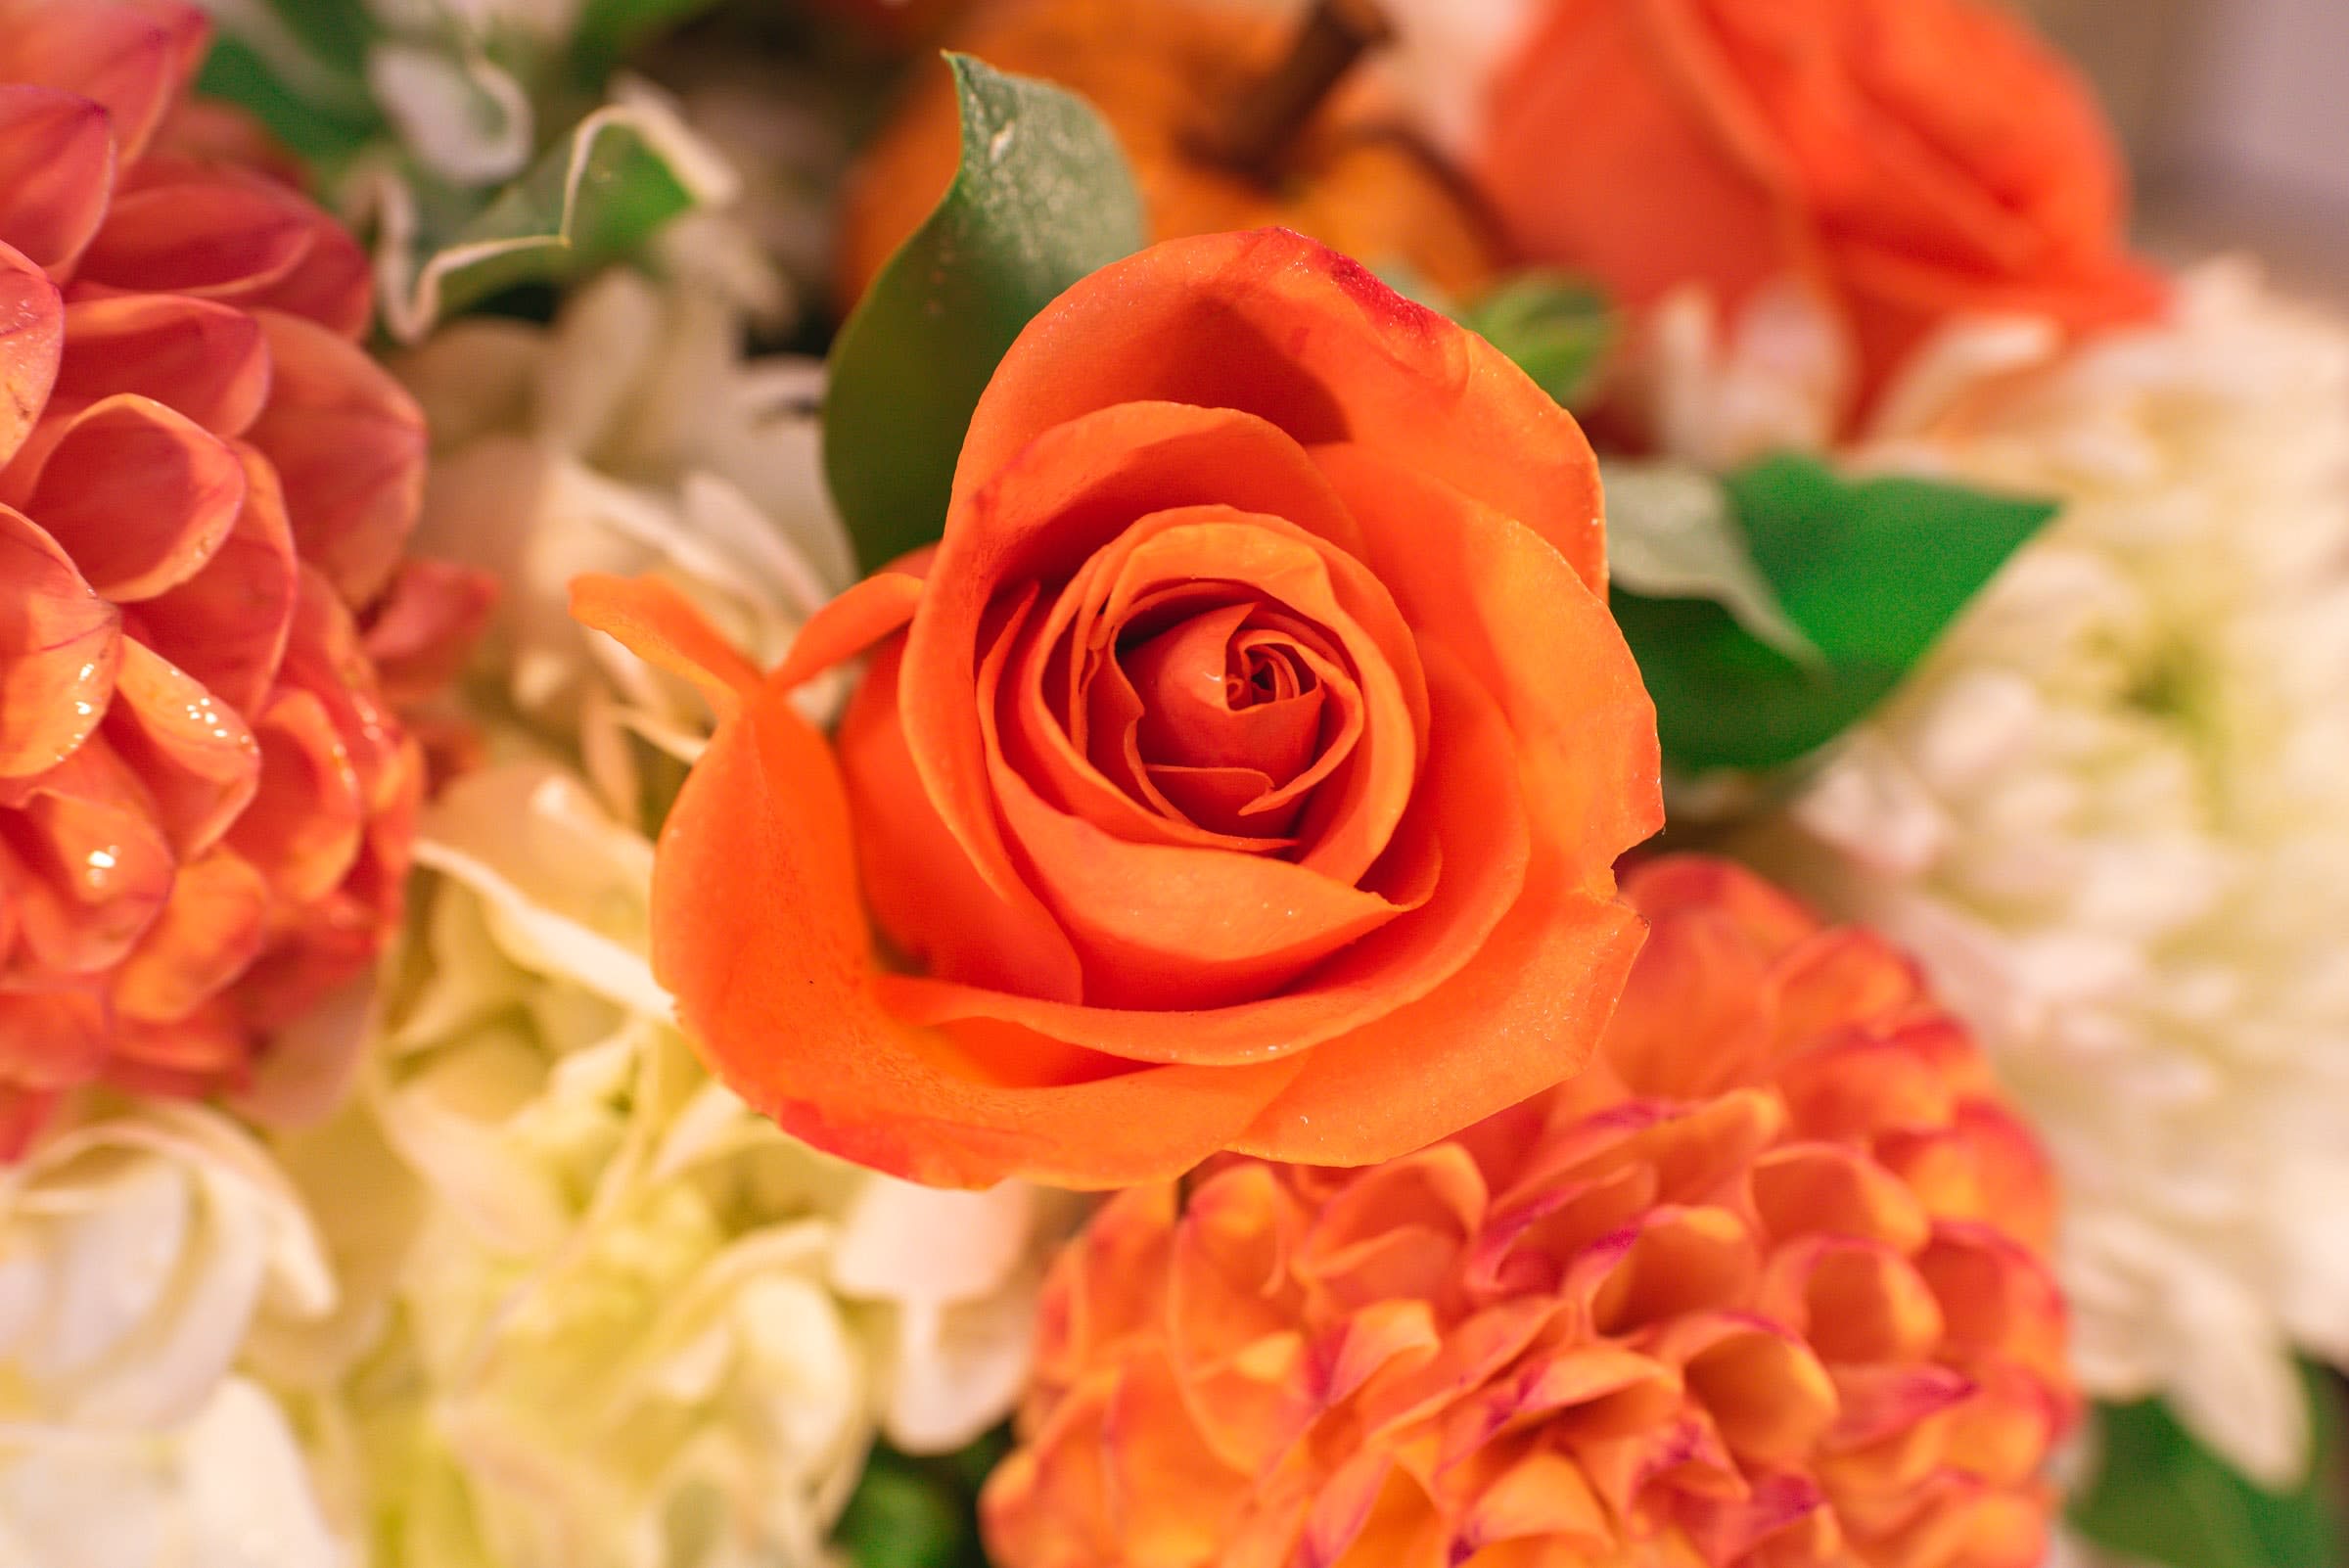 Designer's Choice - Orange - You can trust that our designers will make a beautiful arrangement for your occasion with the color orange as the main focus.